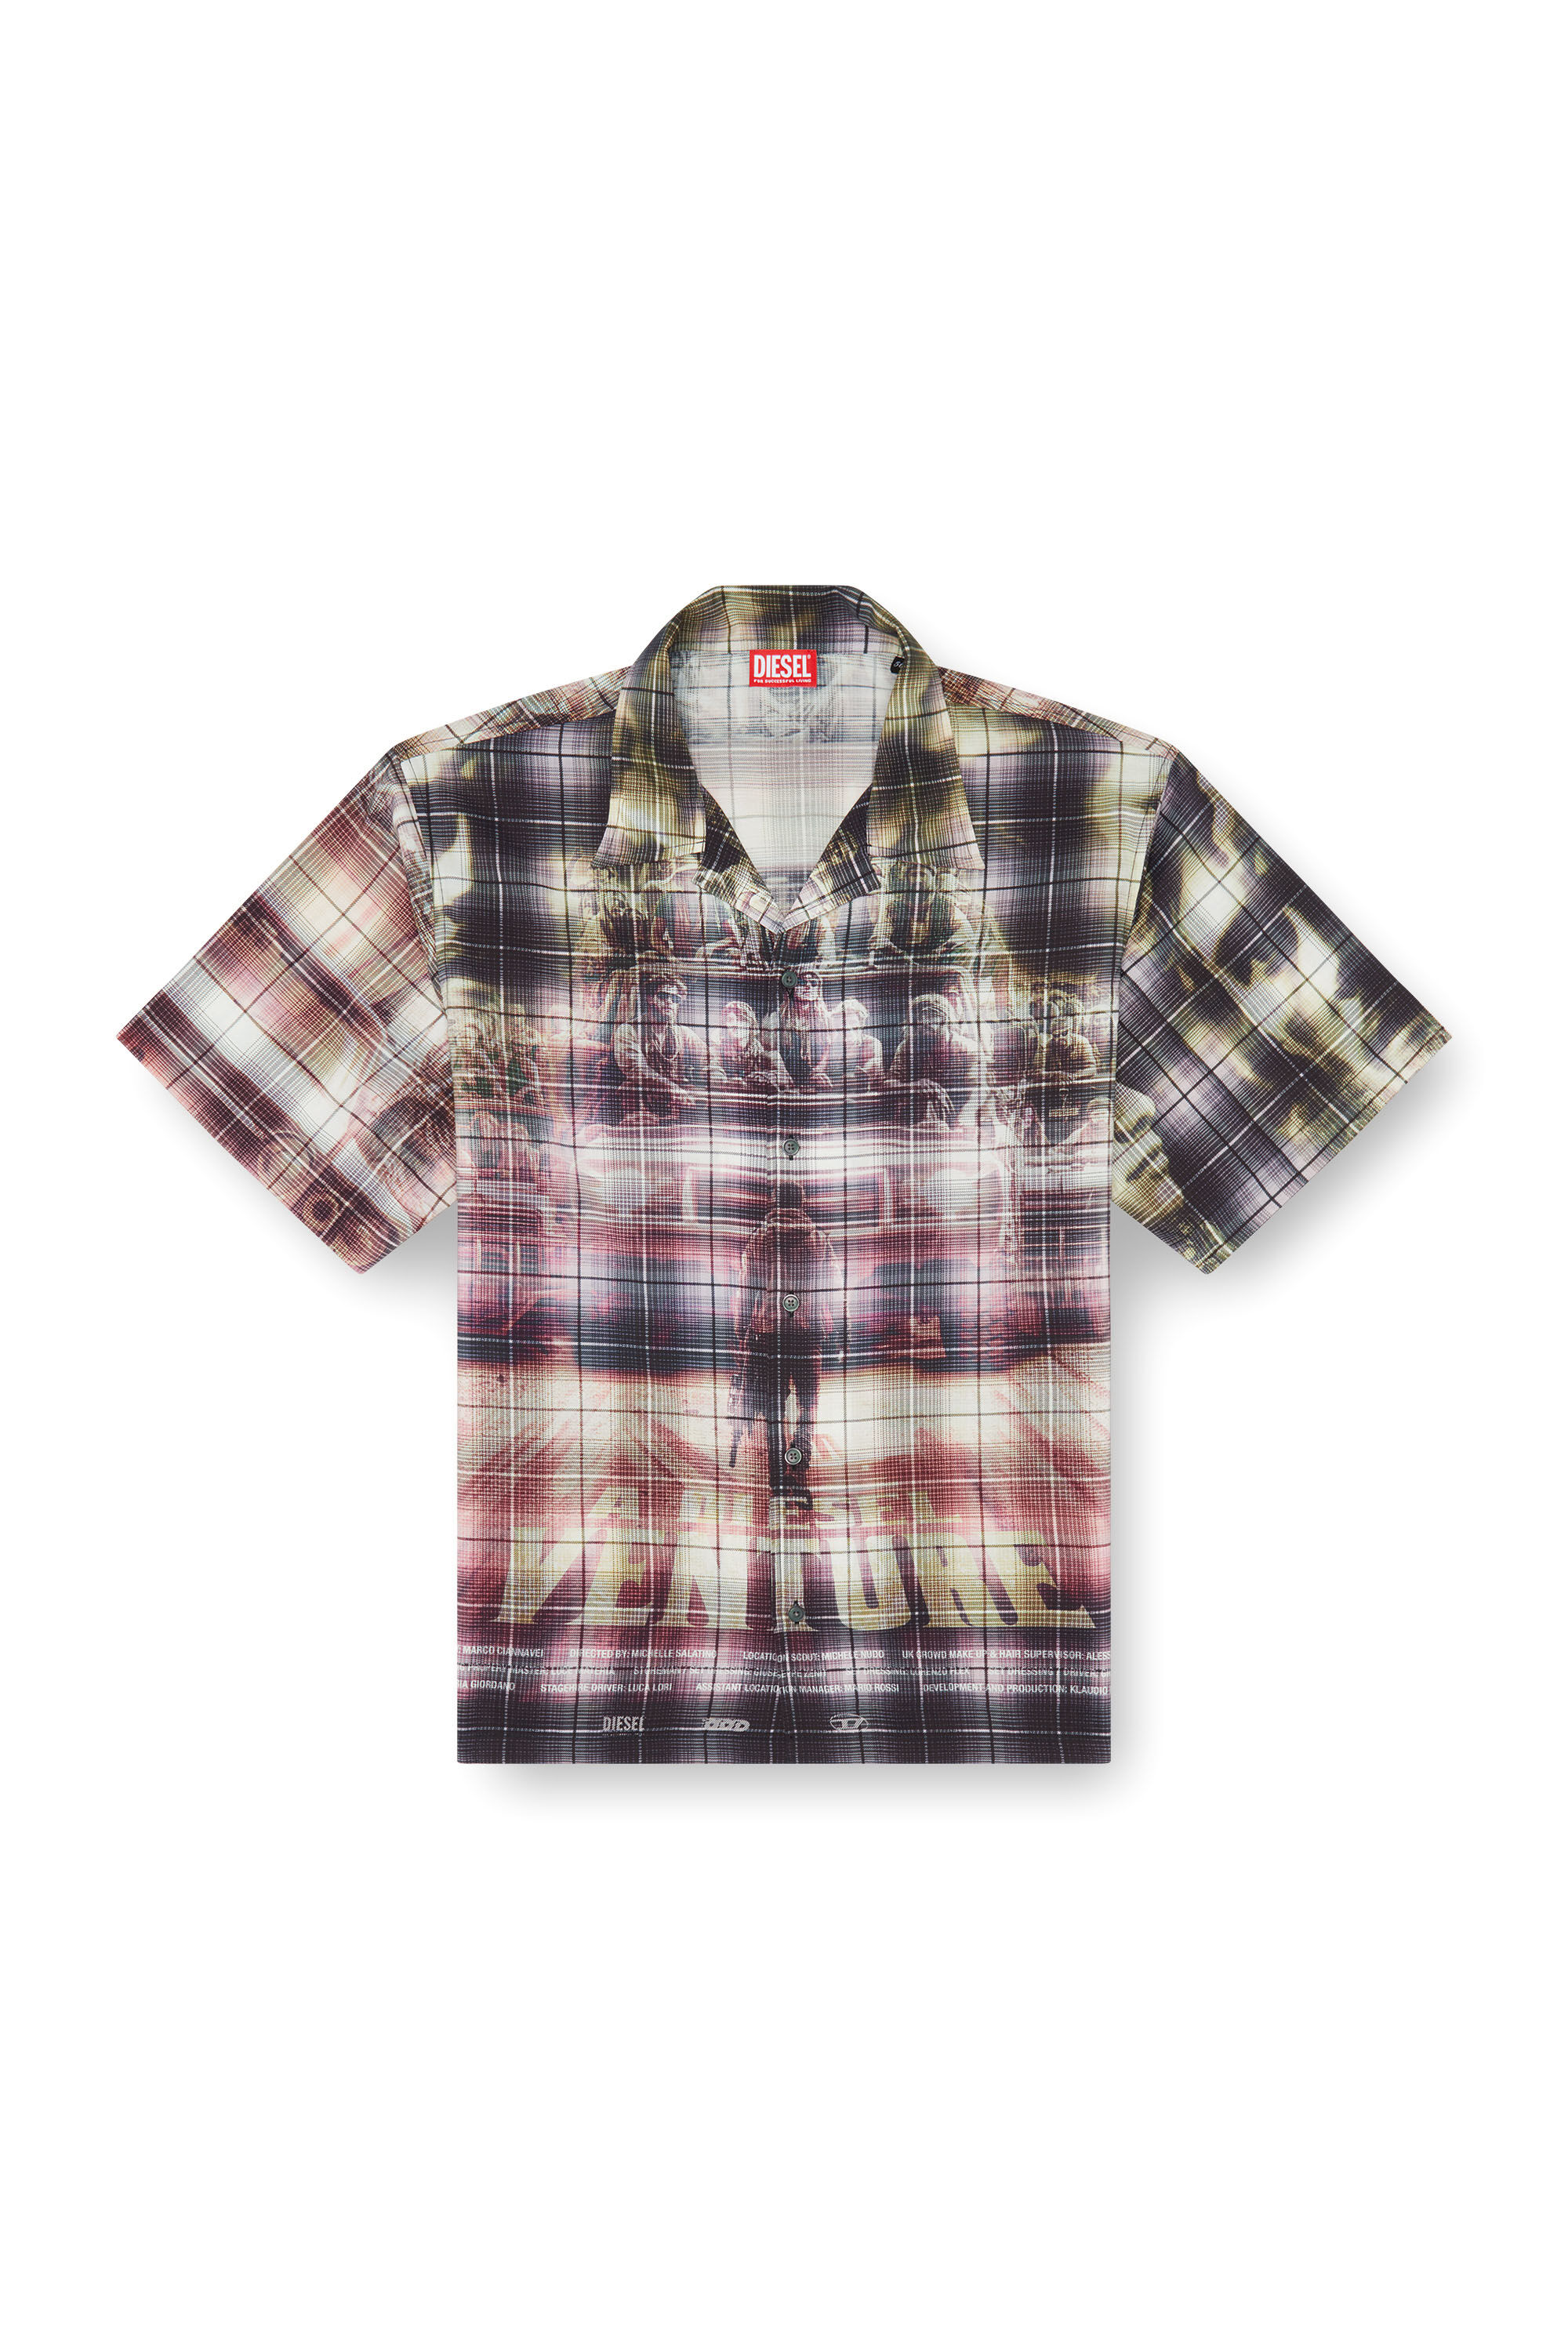 Diesel - S-TILBORG, Male Short-sleeve check shirt with poster print in マルチカラー - Image 2